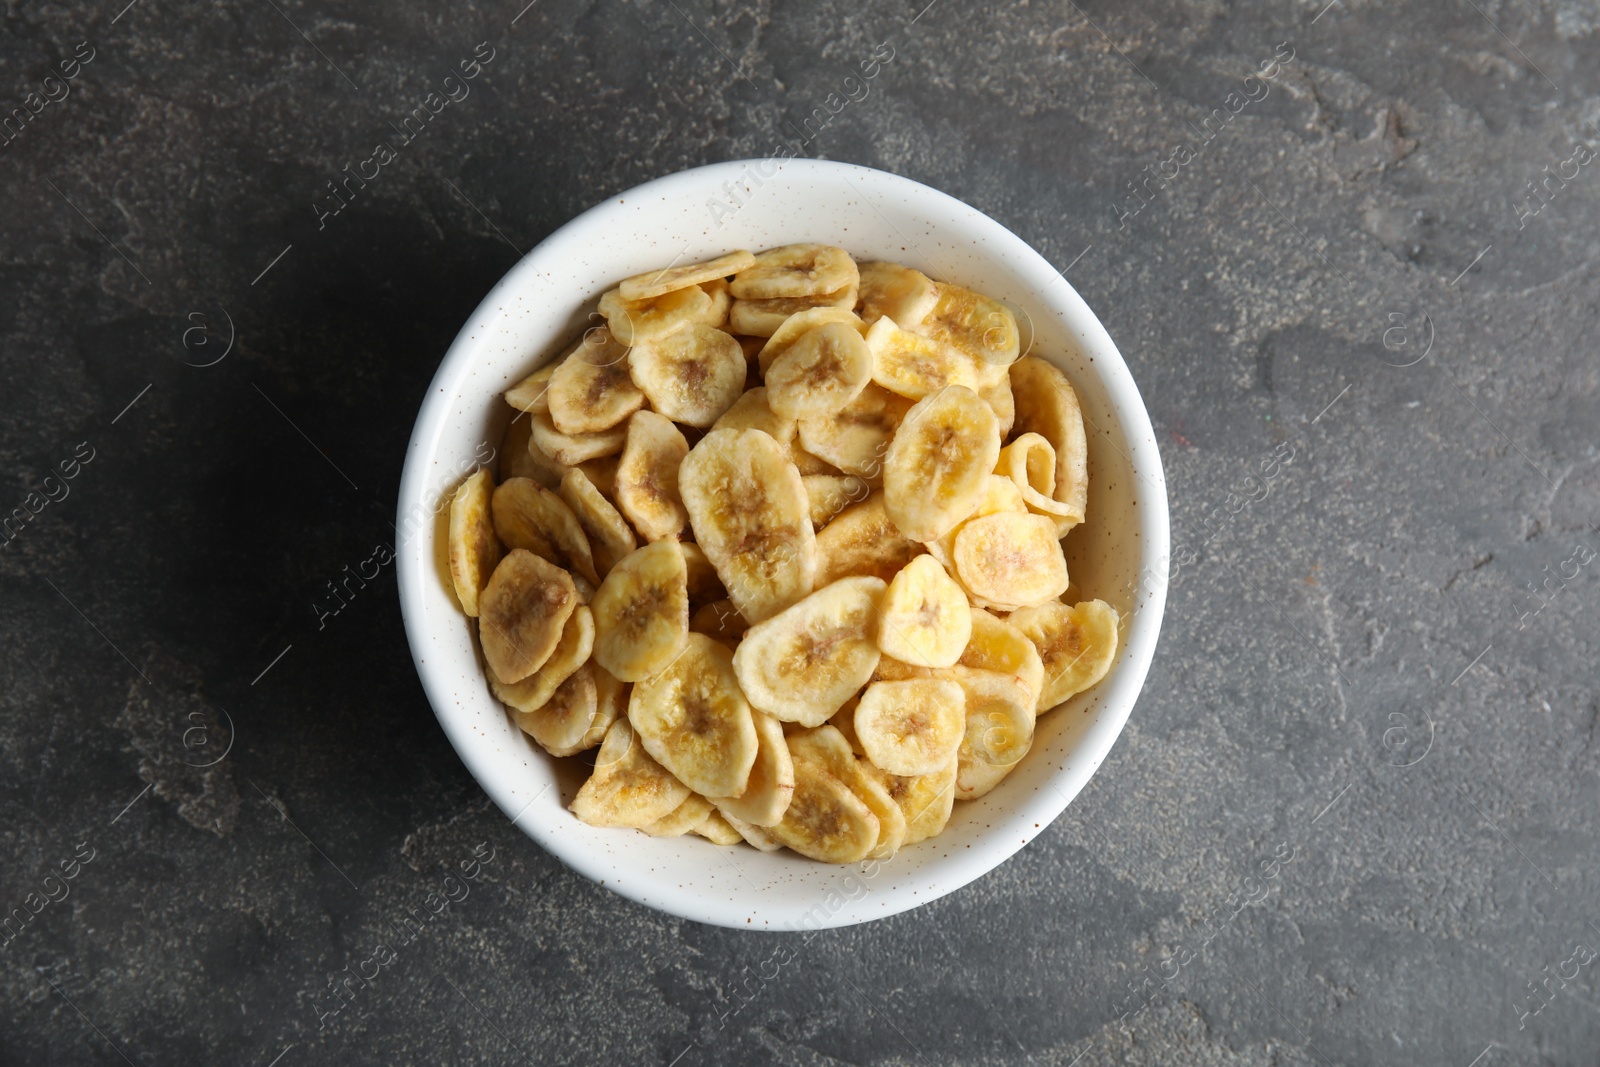 Photo of Bowl with sweet banana slices on grey background, top view. Dried fruit as healthy snack